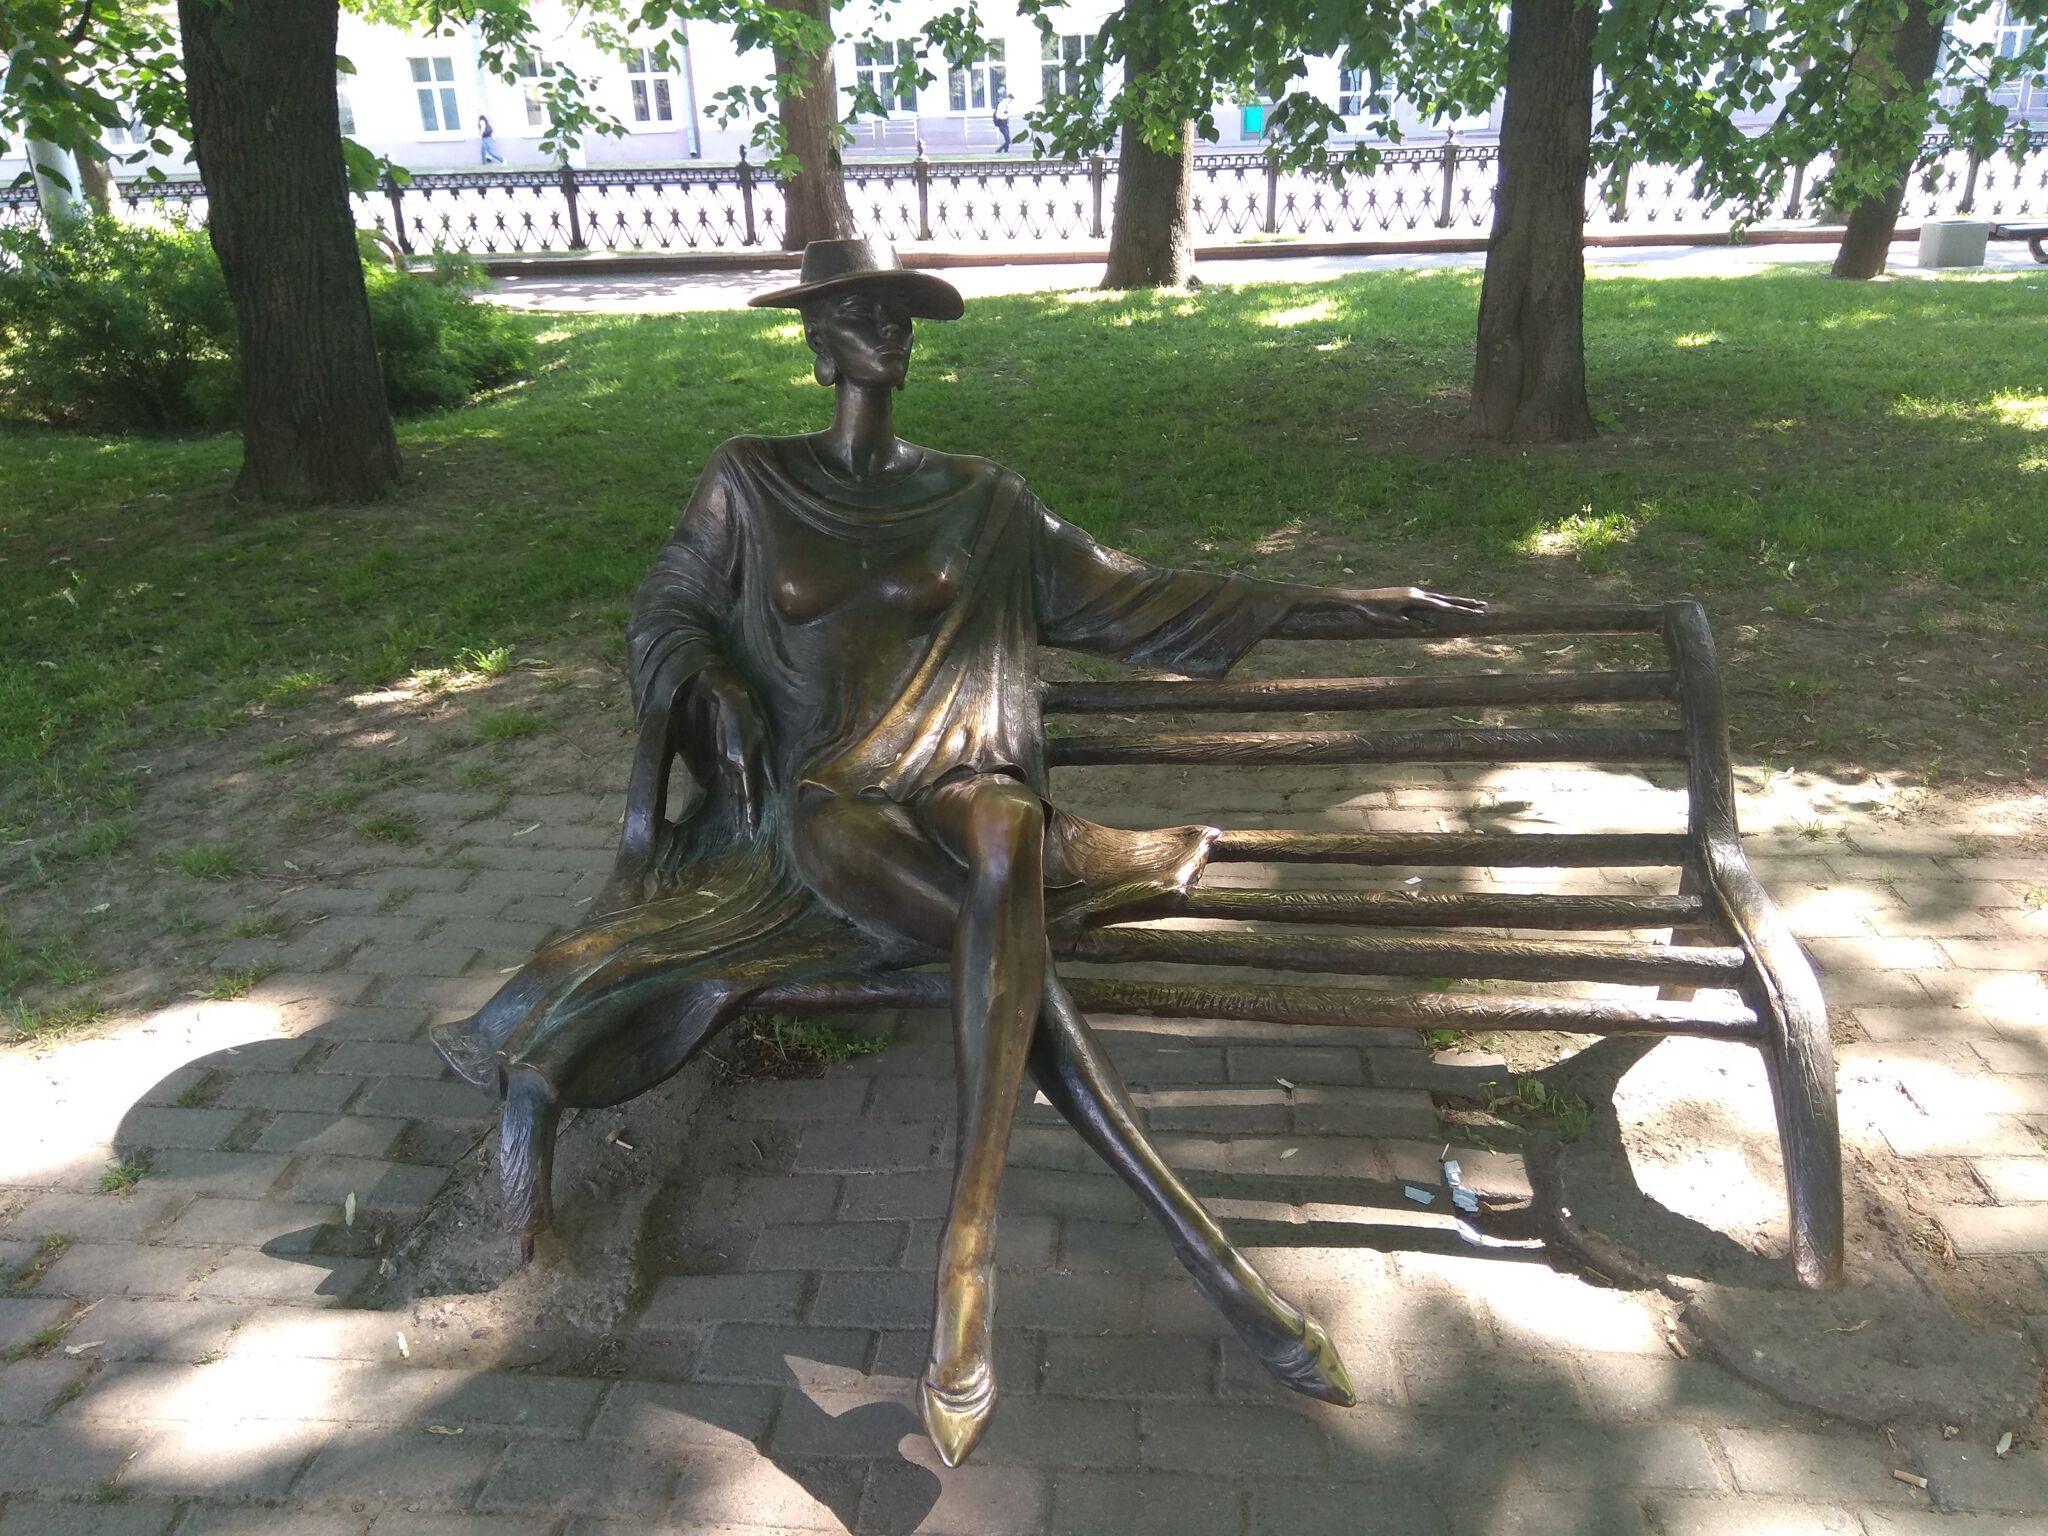 Unknown - Minsk&mdash;The girl on the bench